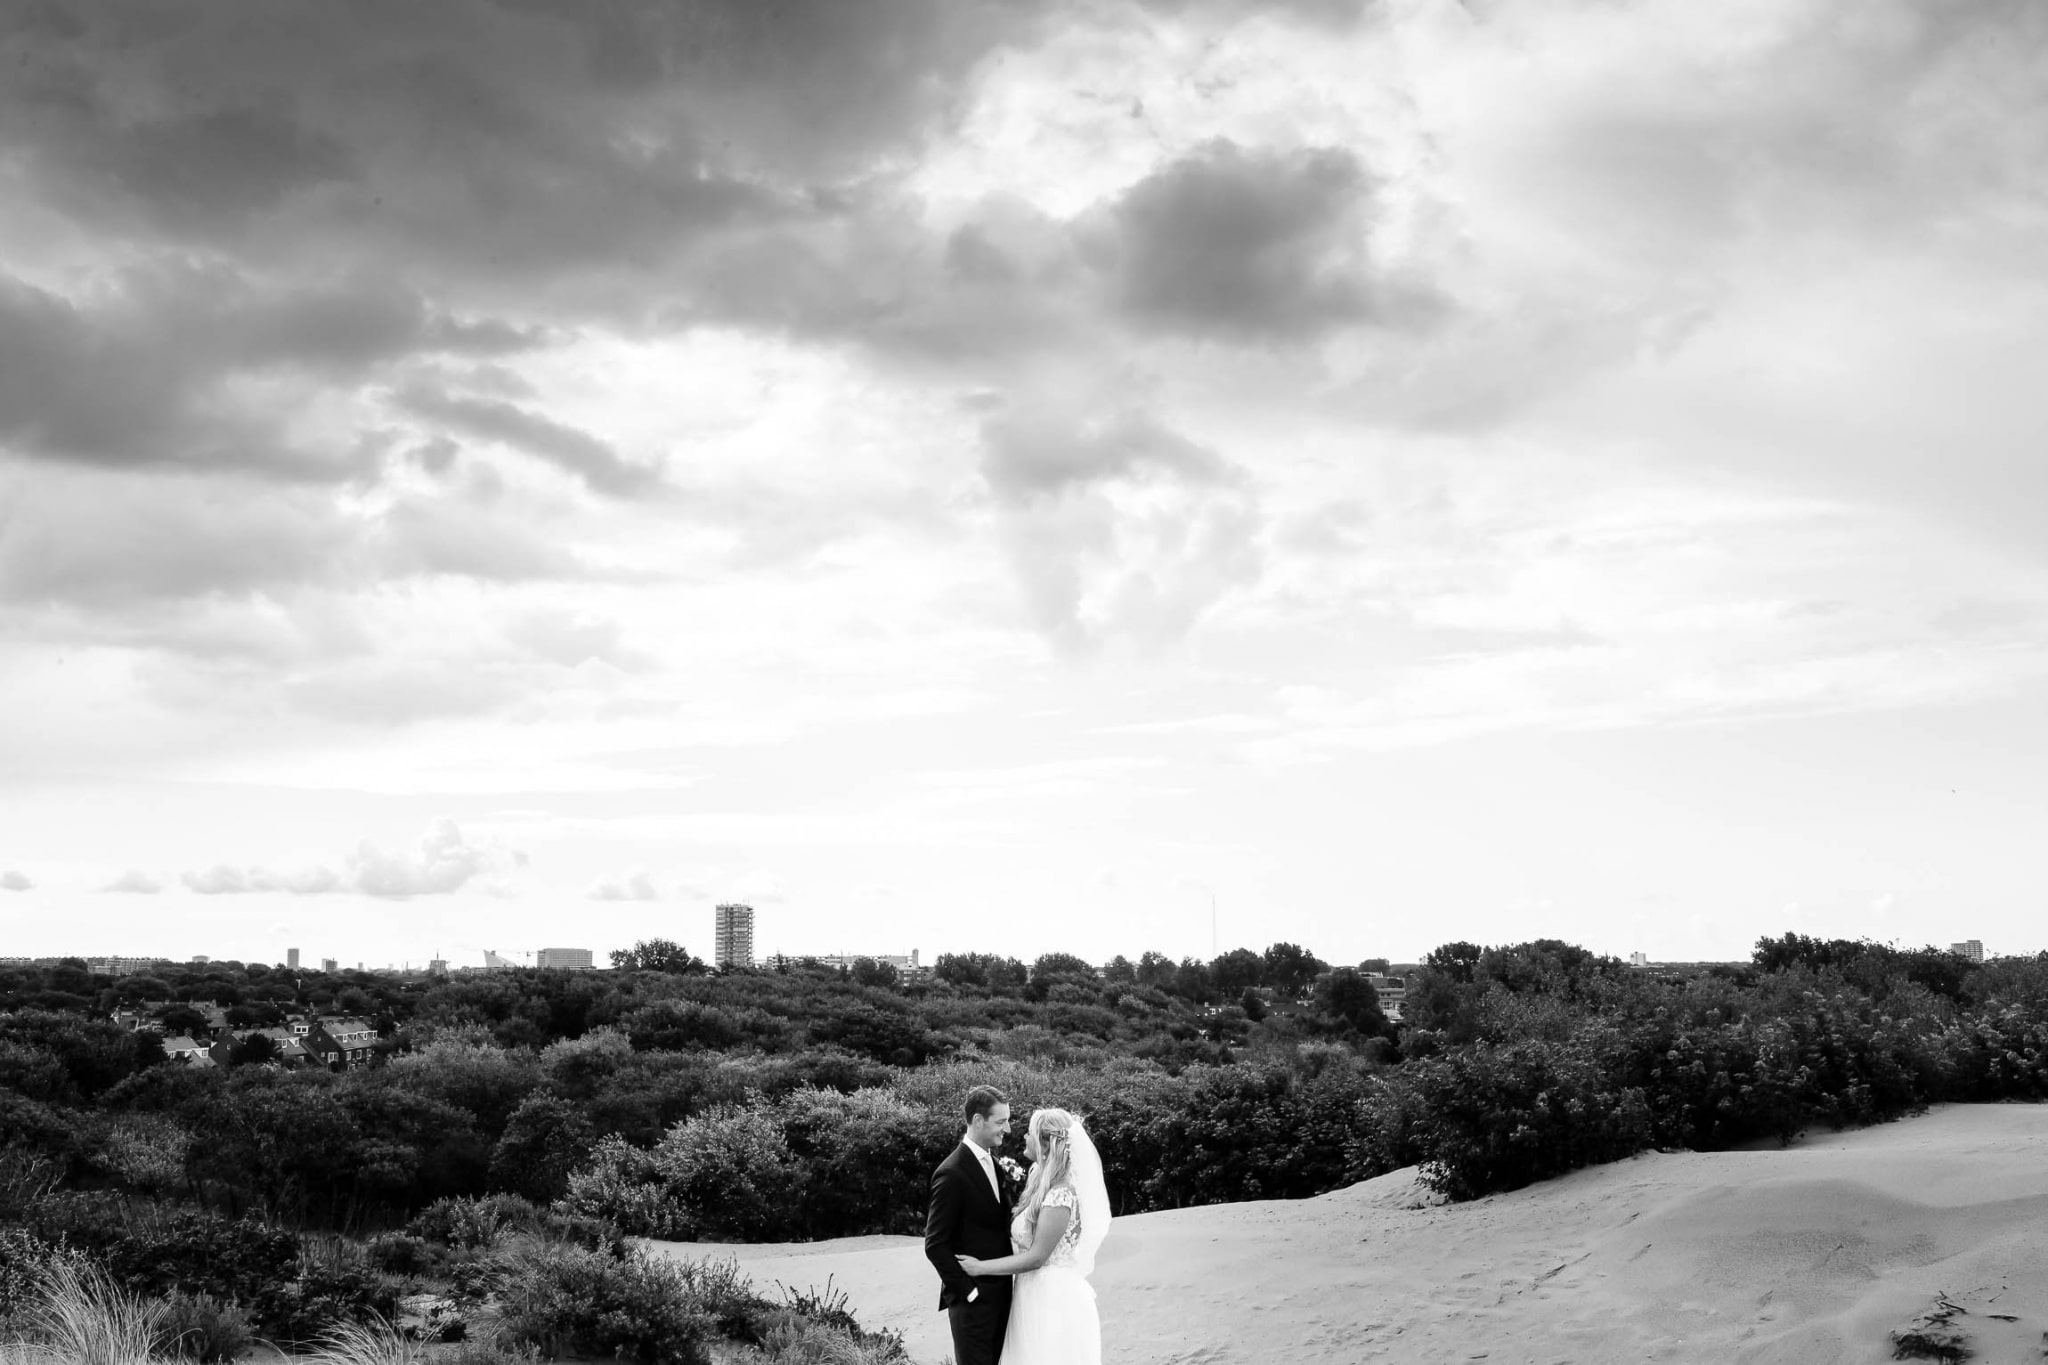 A bride and groom stand on a sand dune under a cloudy sky.